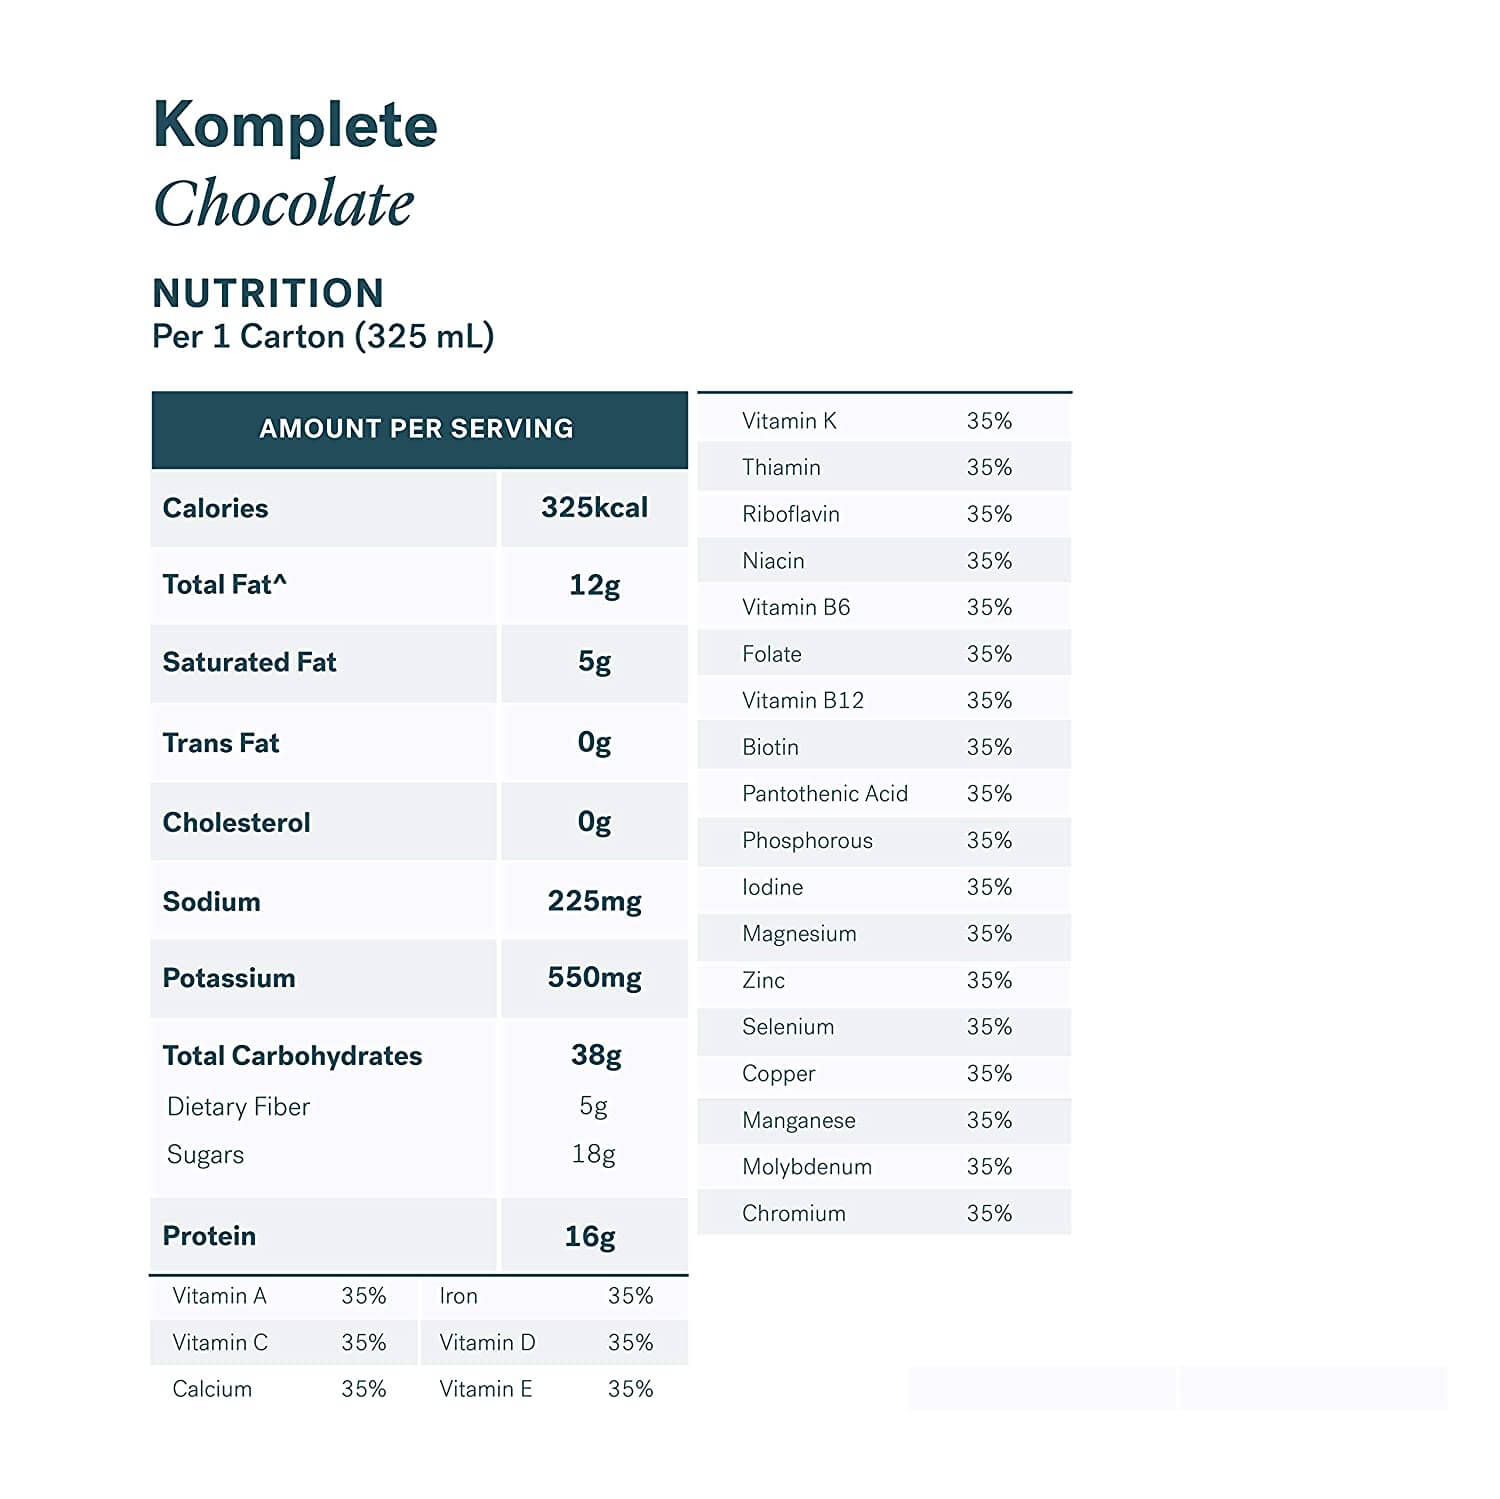 Kate Farms nutrition facts